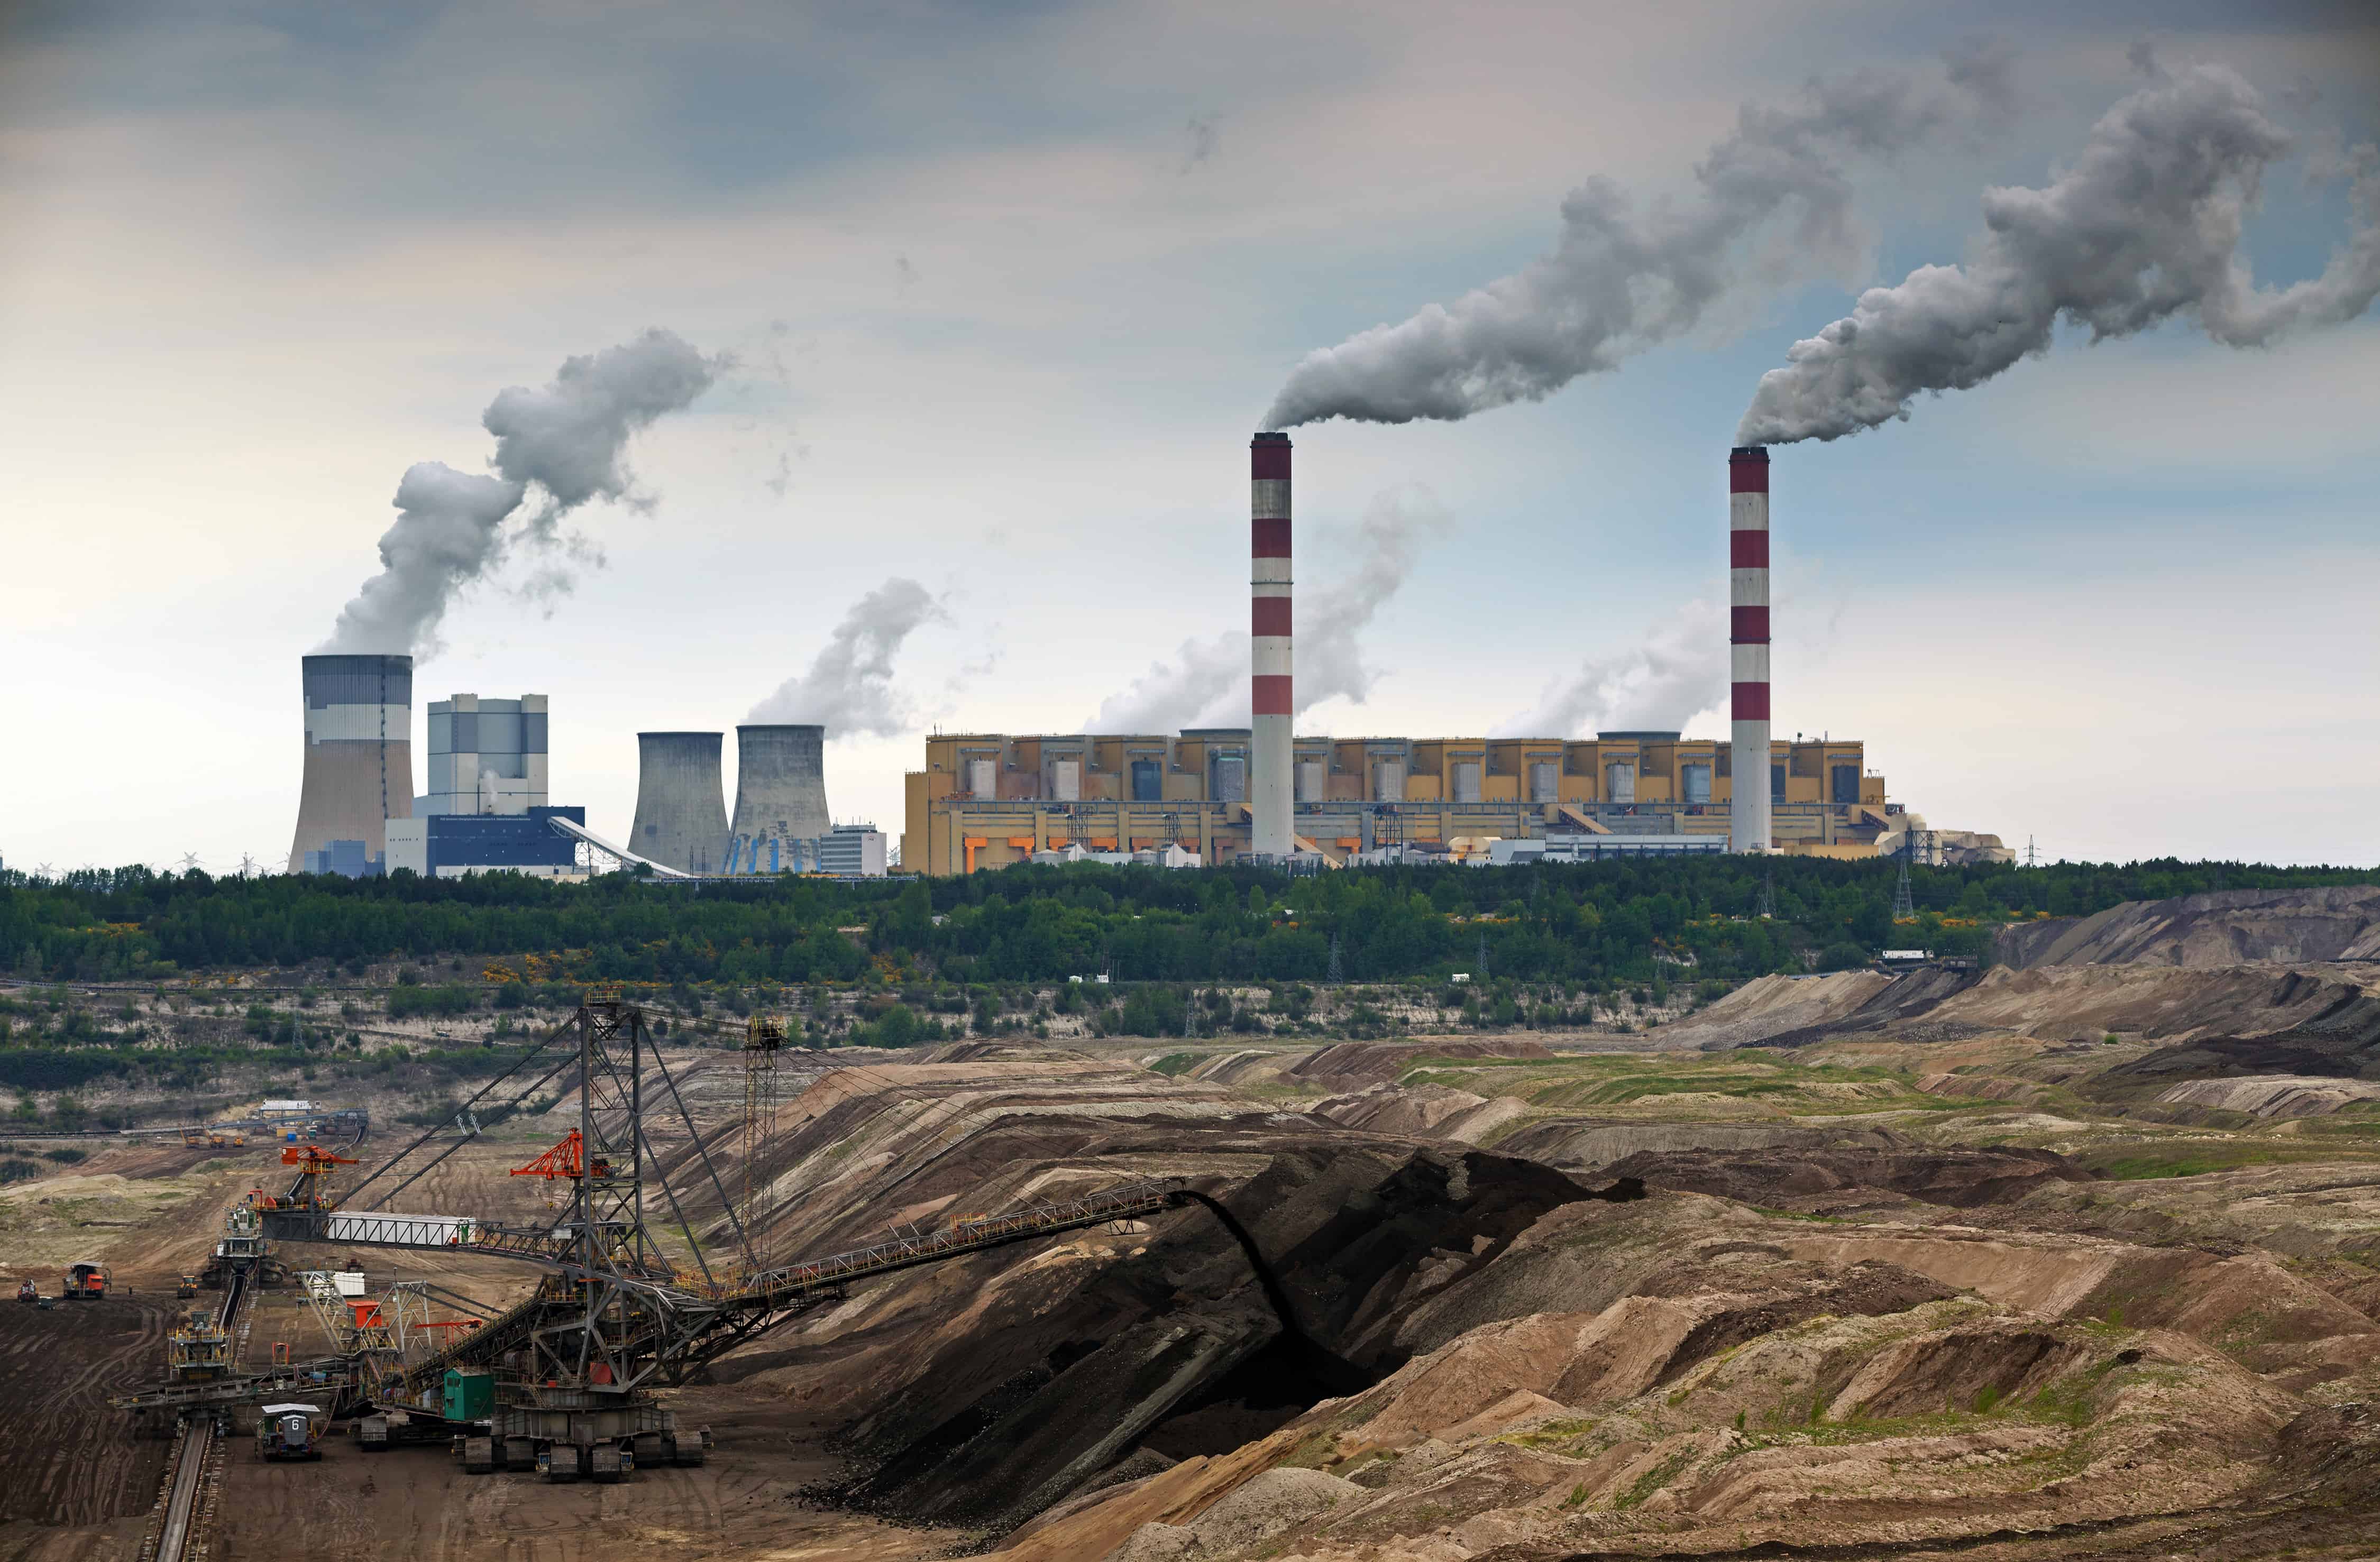 Renewable tax credits and changes on the grid are making most coal-fired plants uneconomical